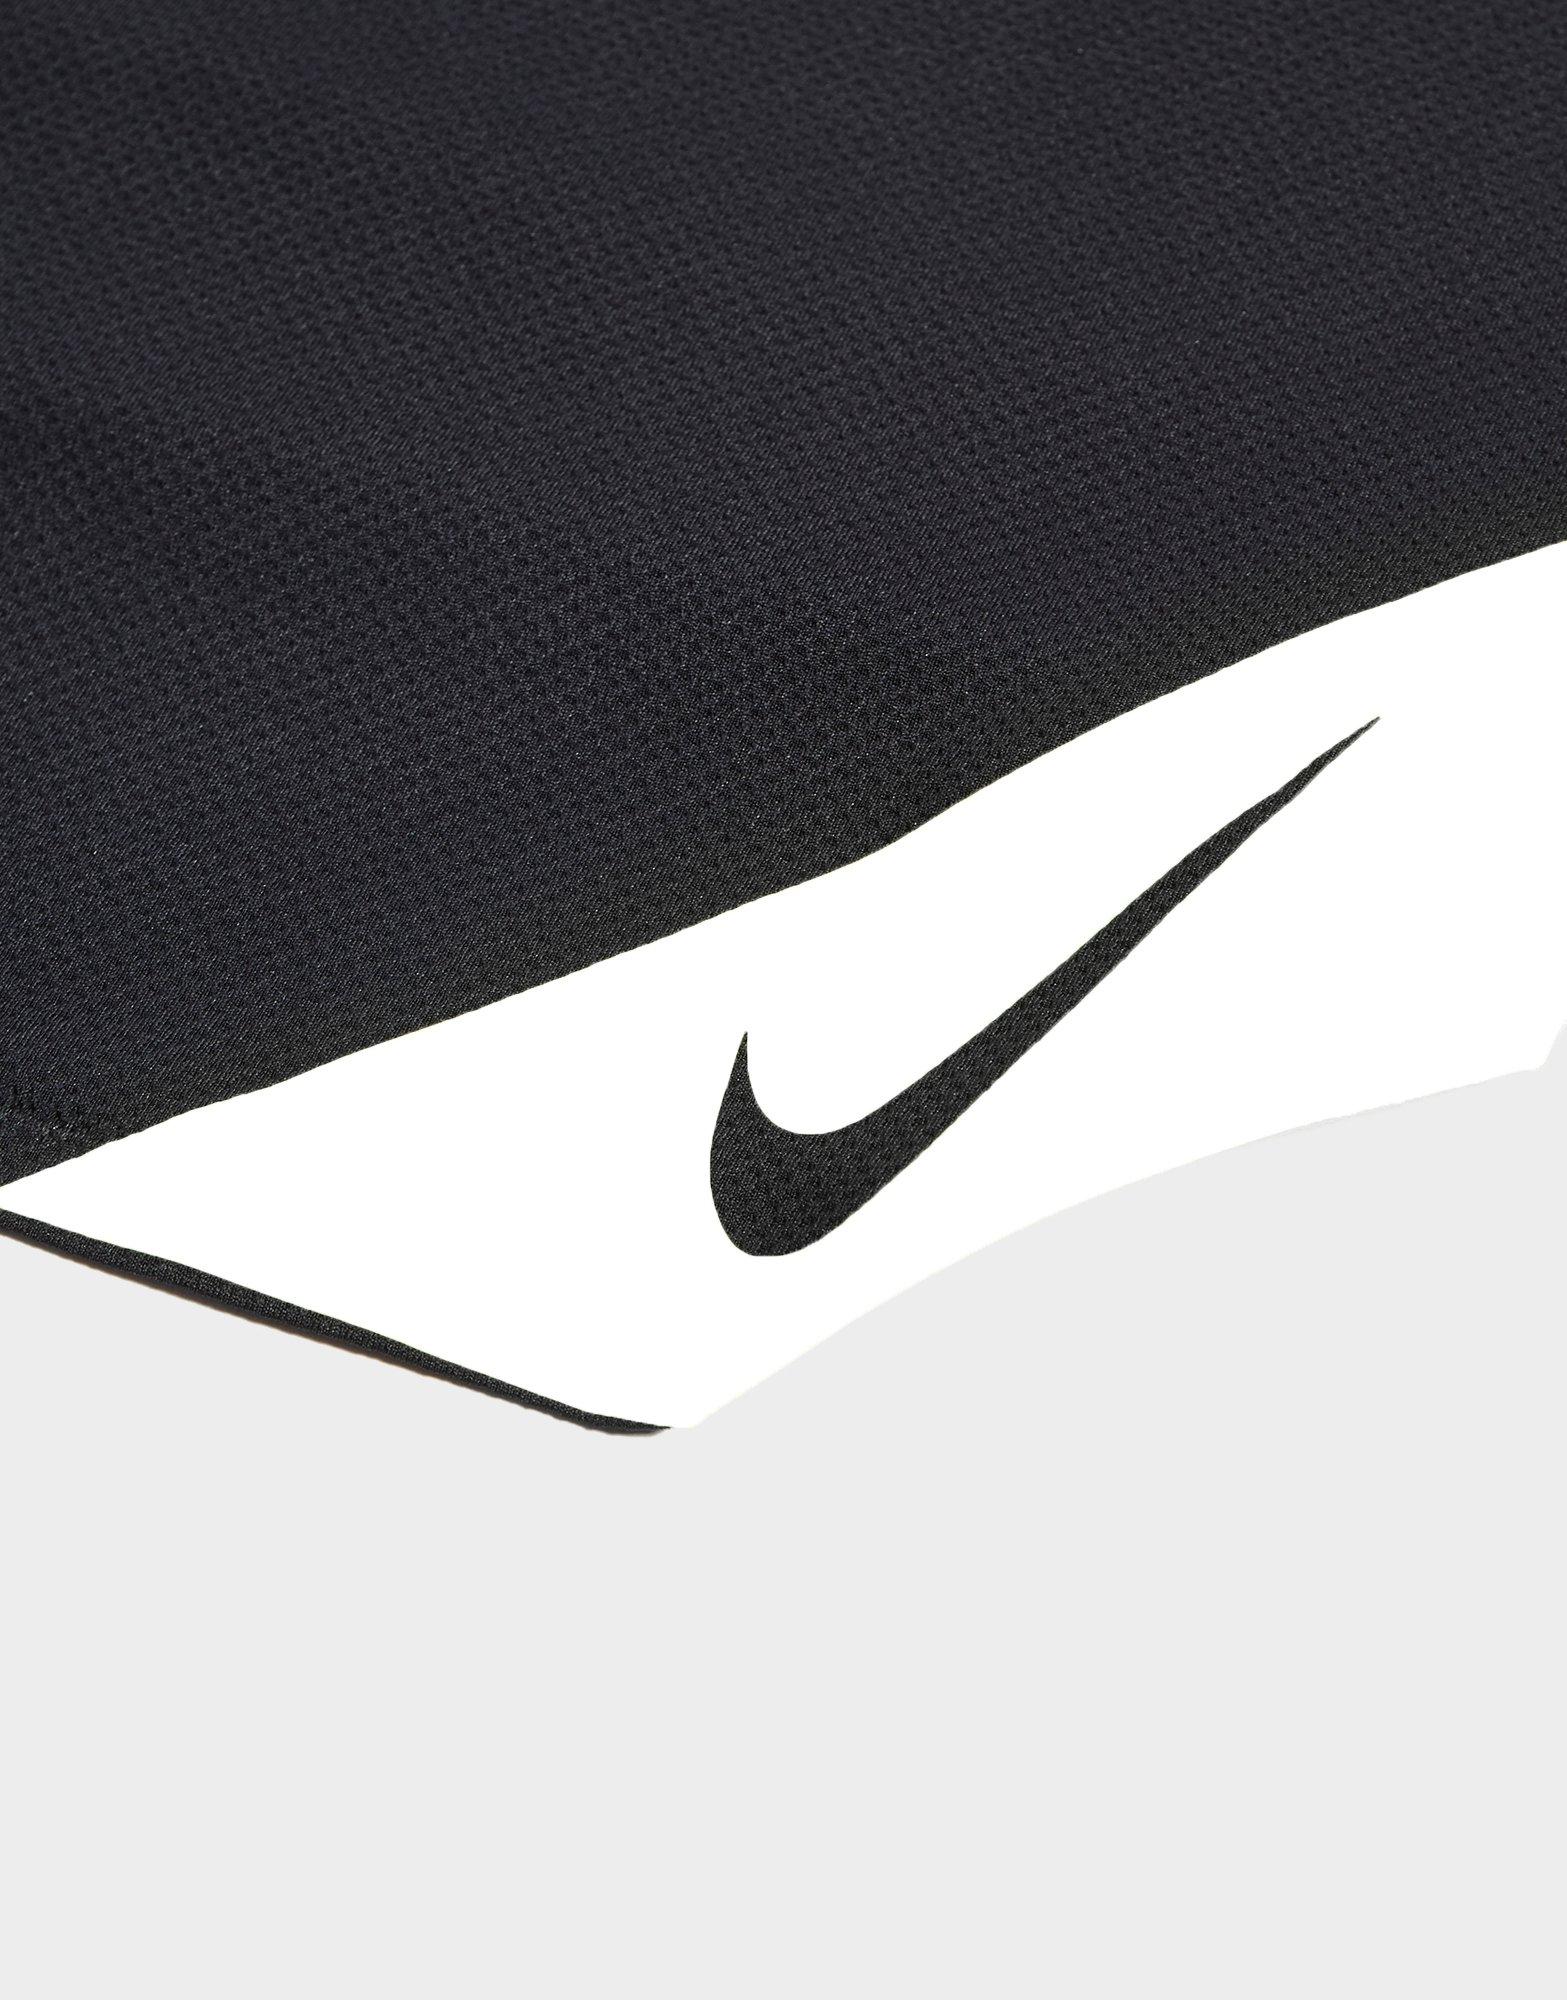 nike small cooling towel